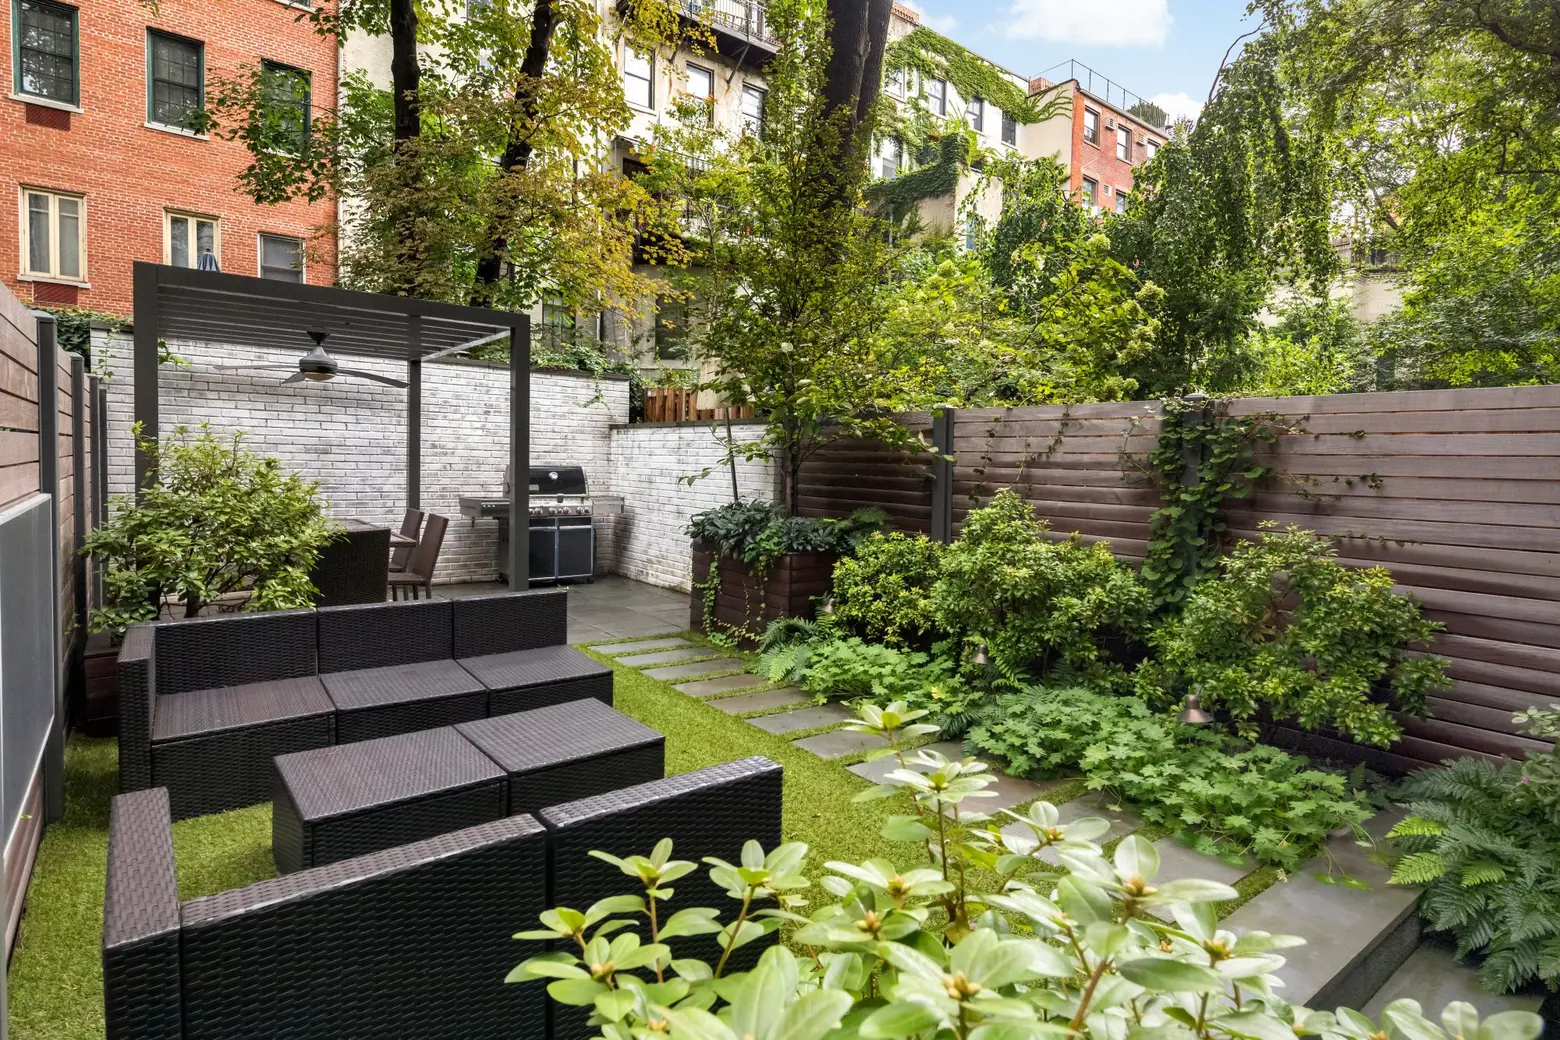 Renovated $3.2M Chelsea co-op has great details inside and a lush garden outside